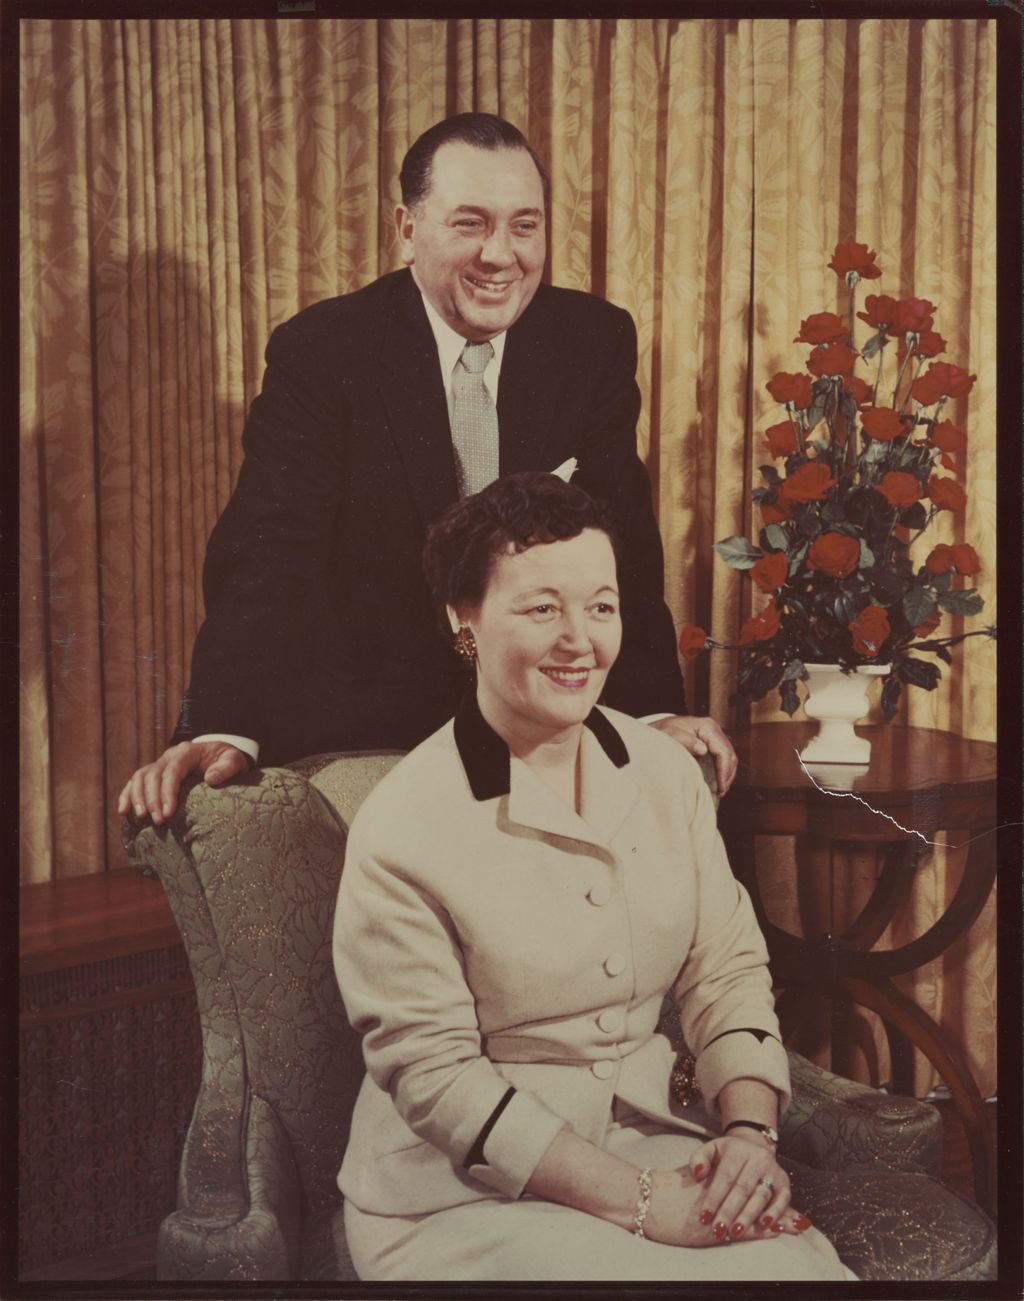 Miniature of Portrait of Eleanor "Sis" Daley and Richard J. Daley